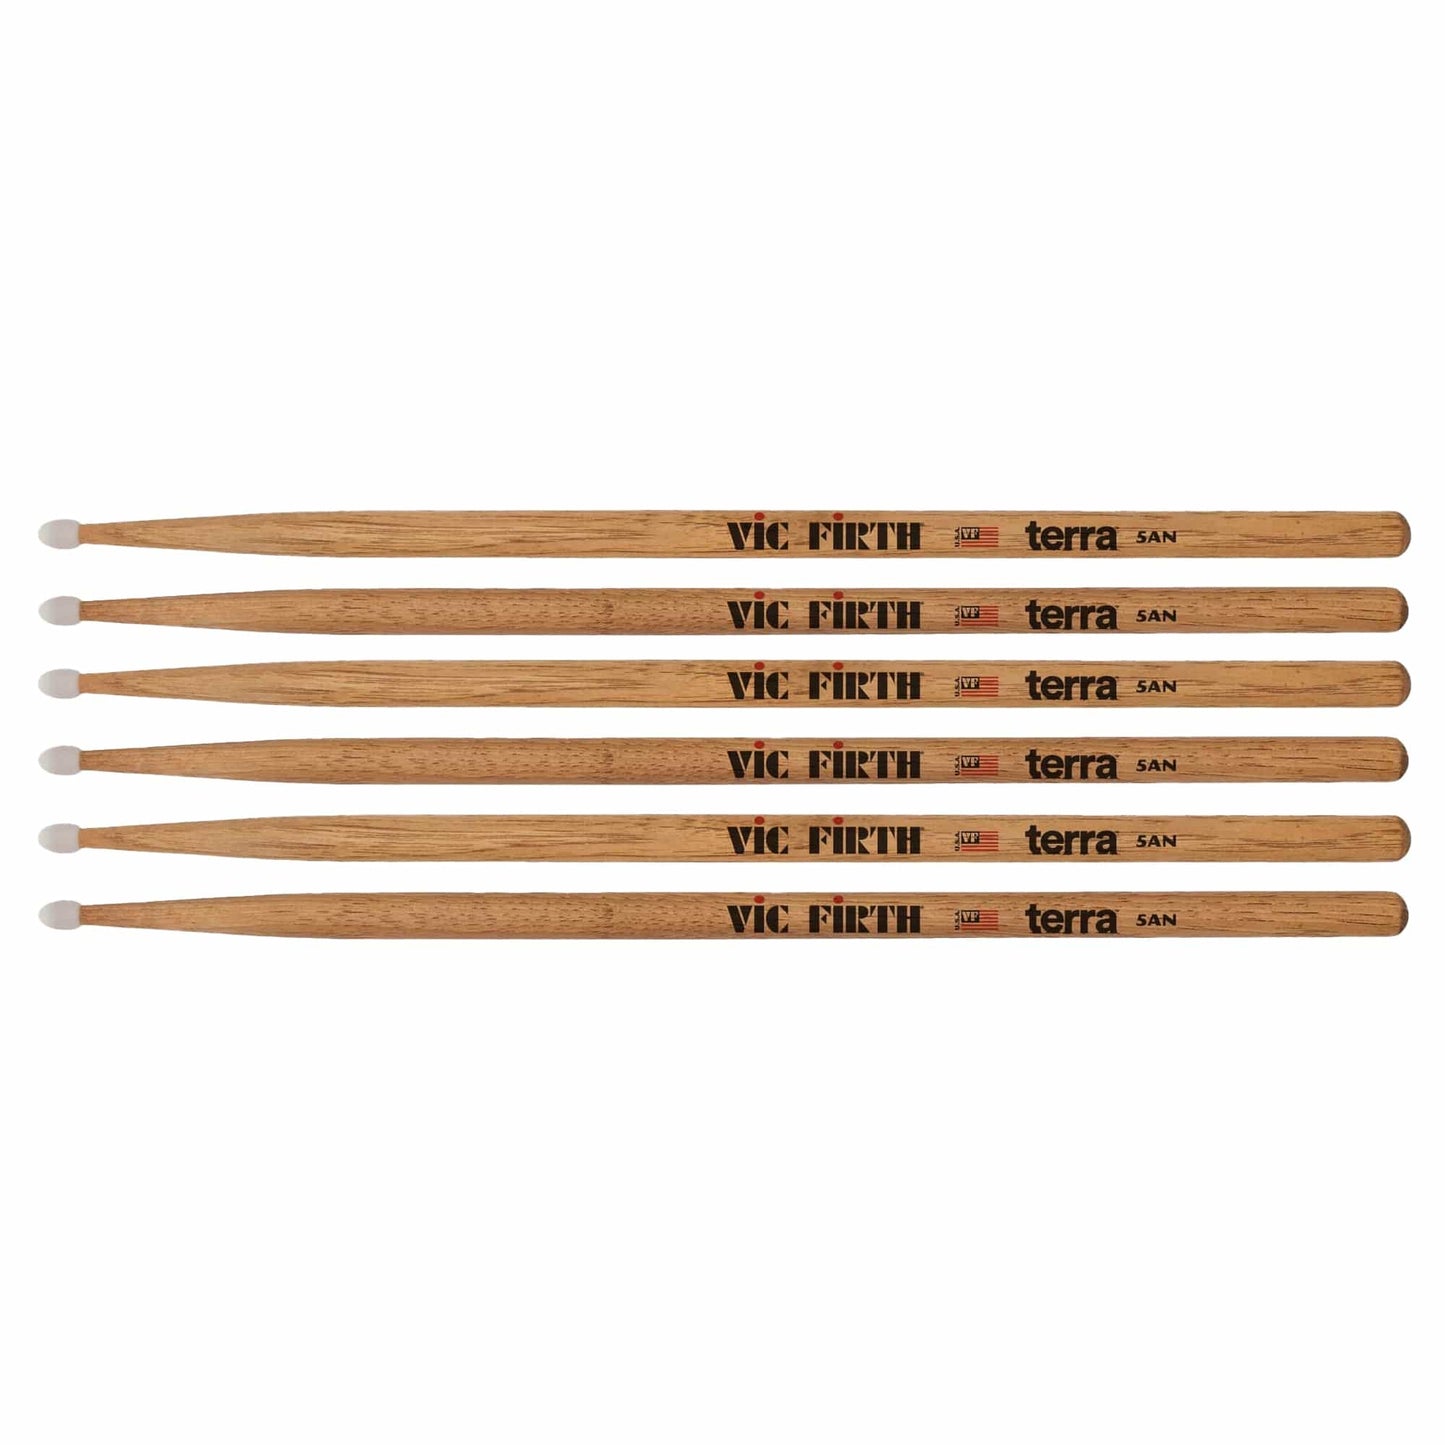 Vic Firth American Classic 5ATN Terra Nylon Tip Drum Sticks 3-Pack Bundle Drums and Percussion / Parts and Accessories / Drum Sticks and Mallets